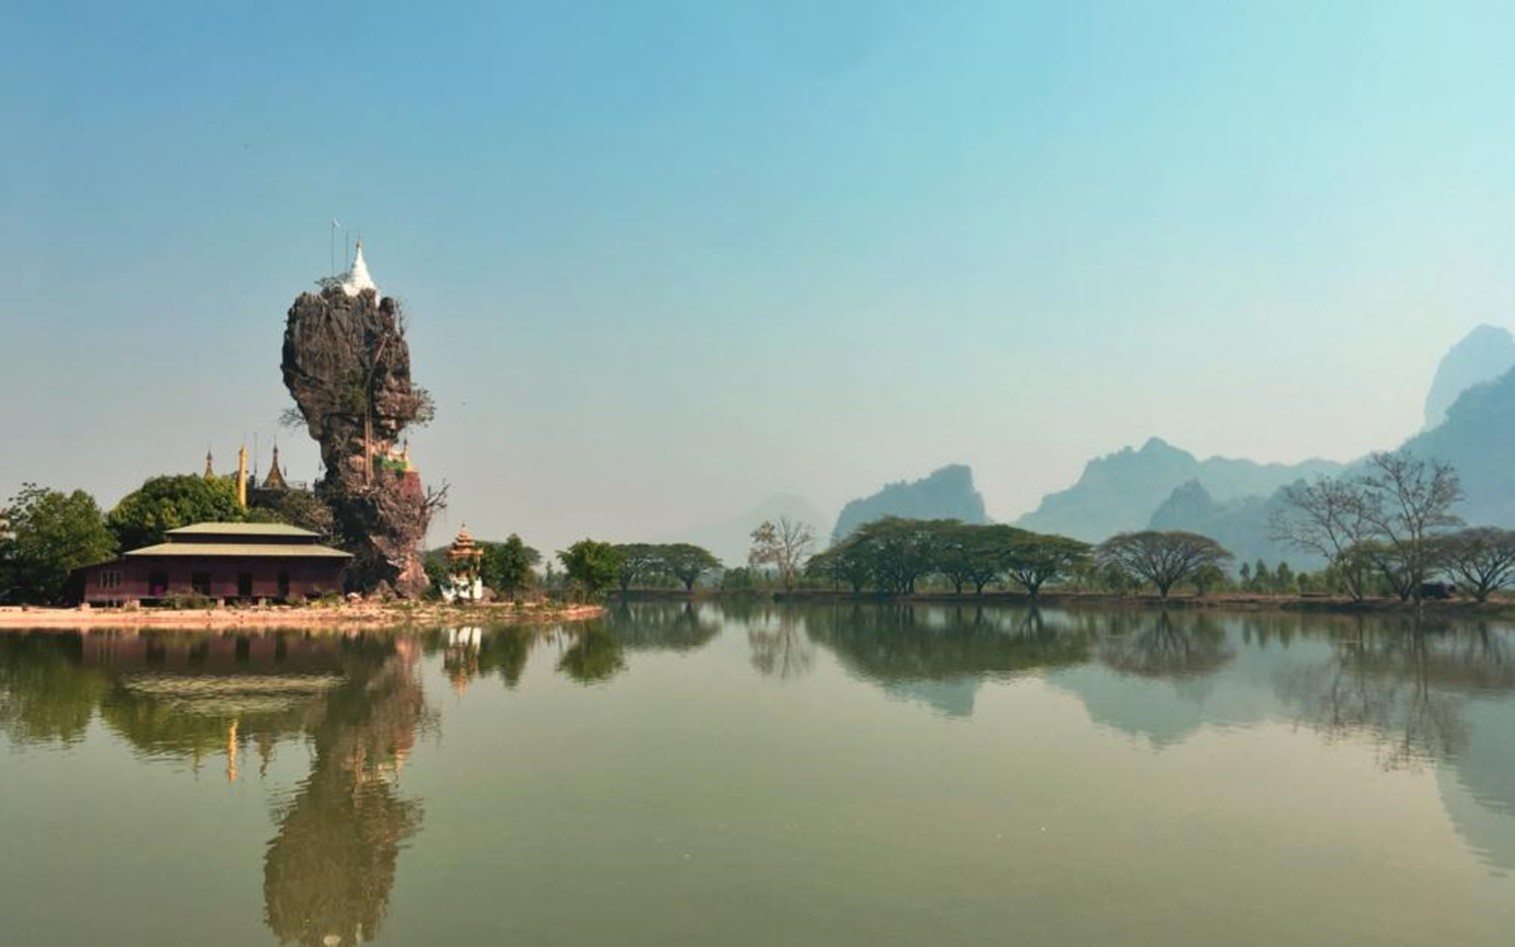 Hpa An – Site of captivated nature